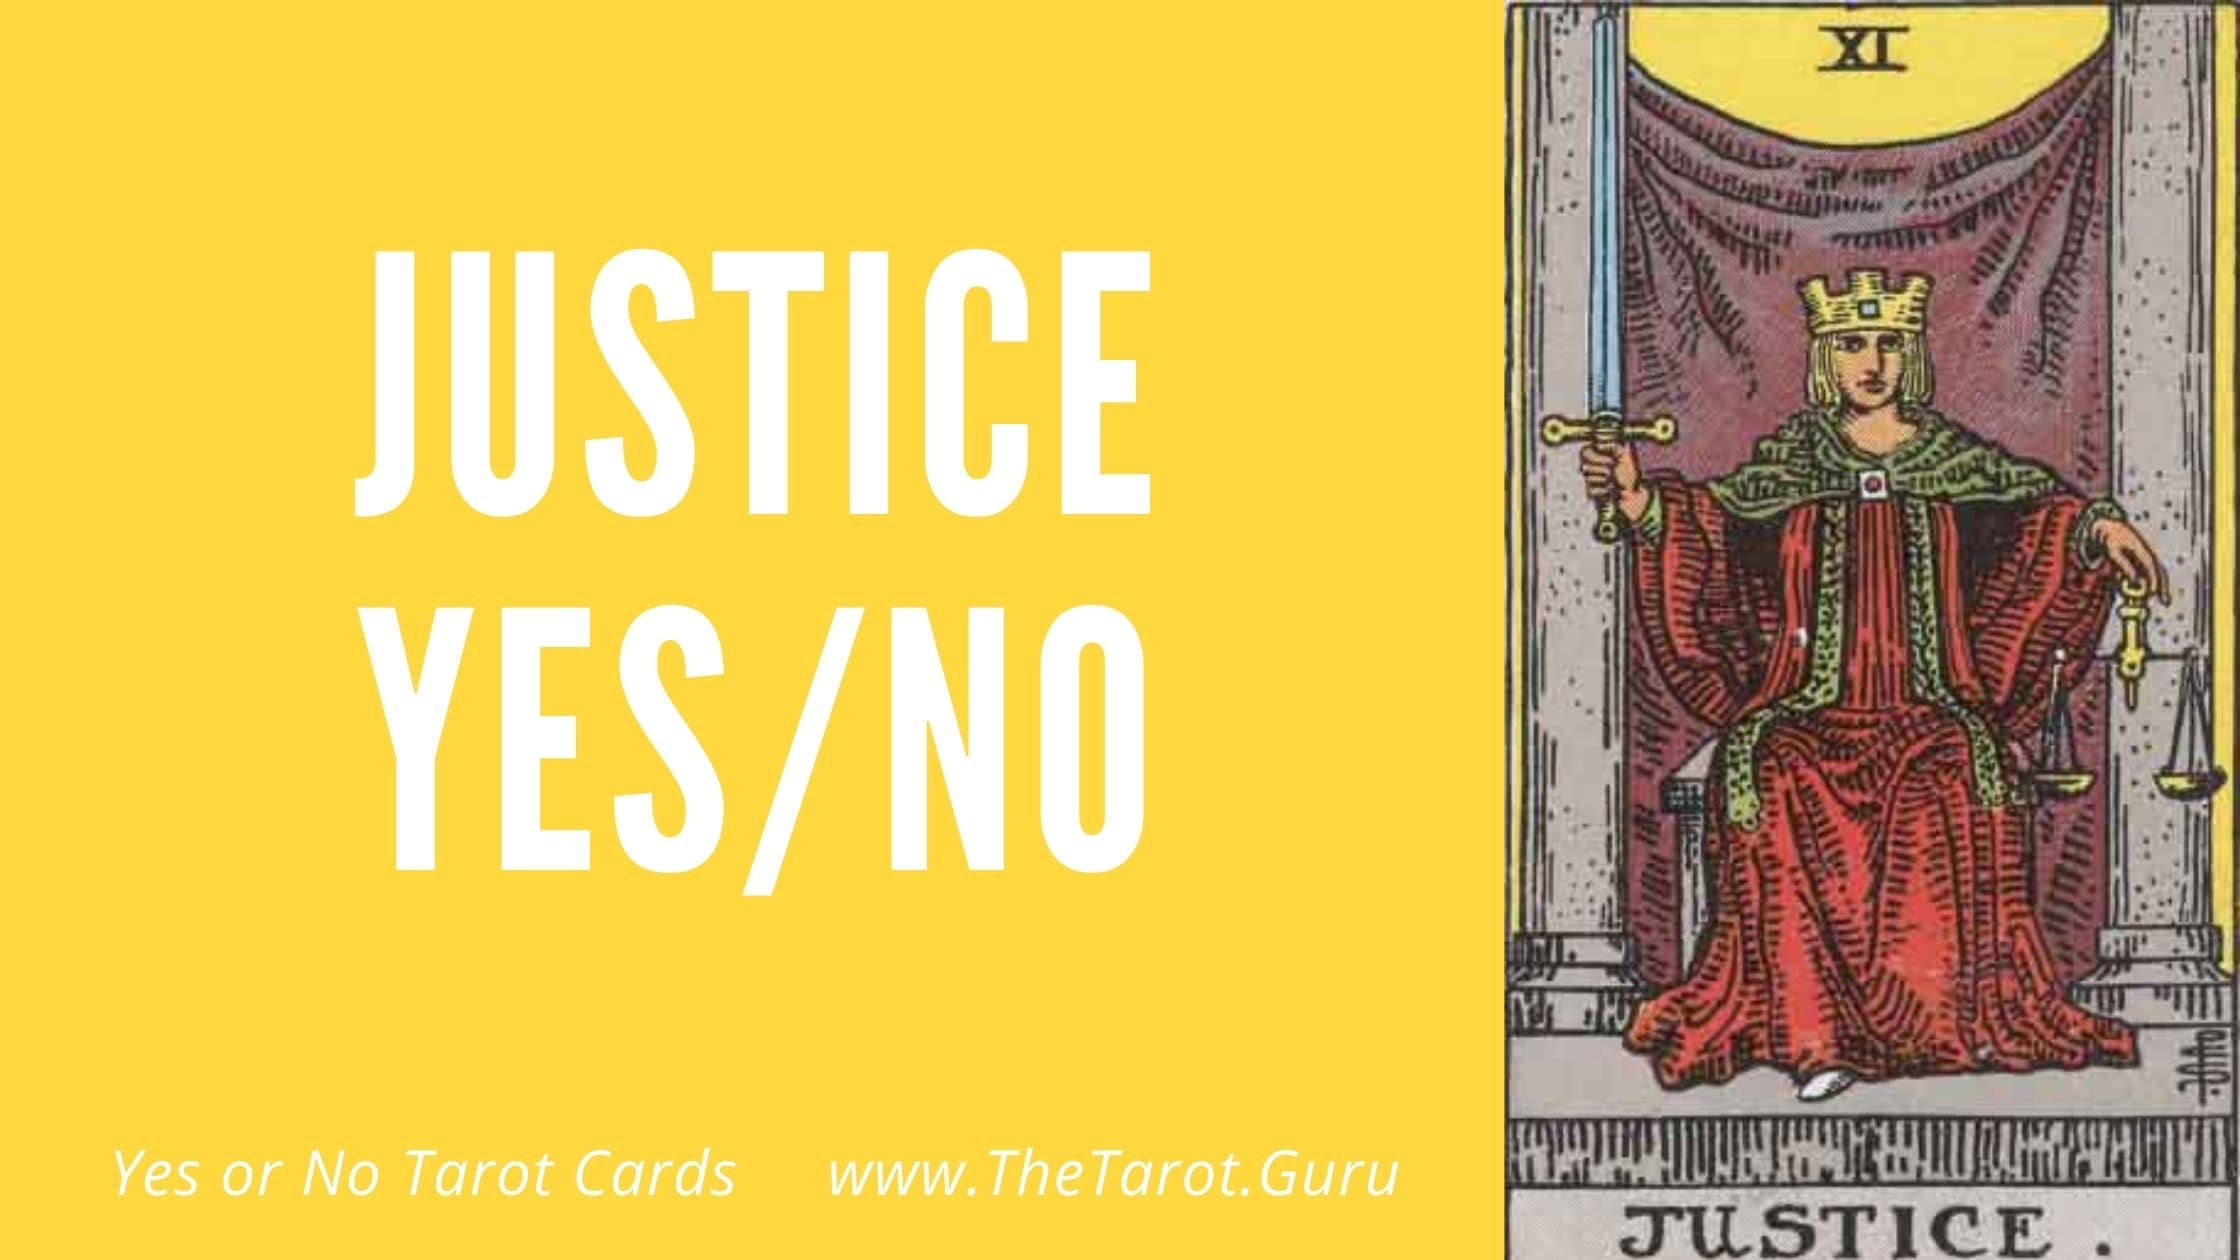 Justice Yes or No Tarot